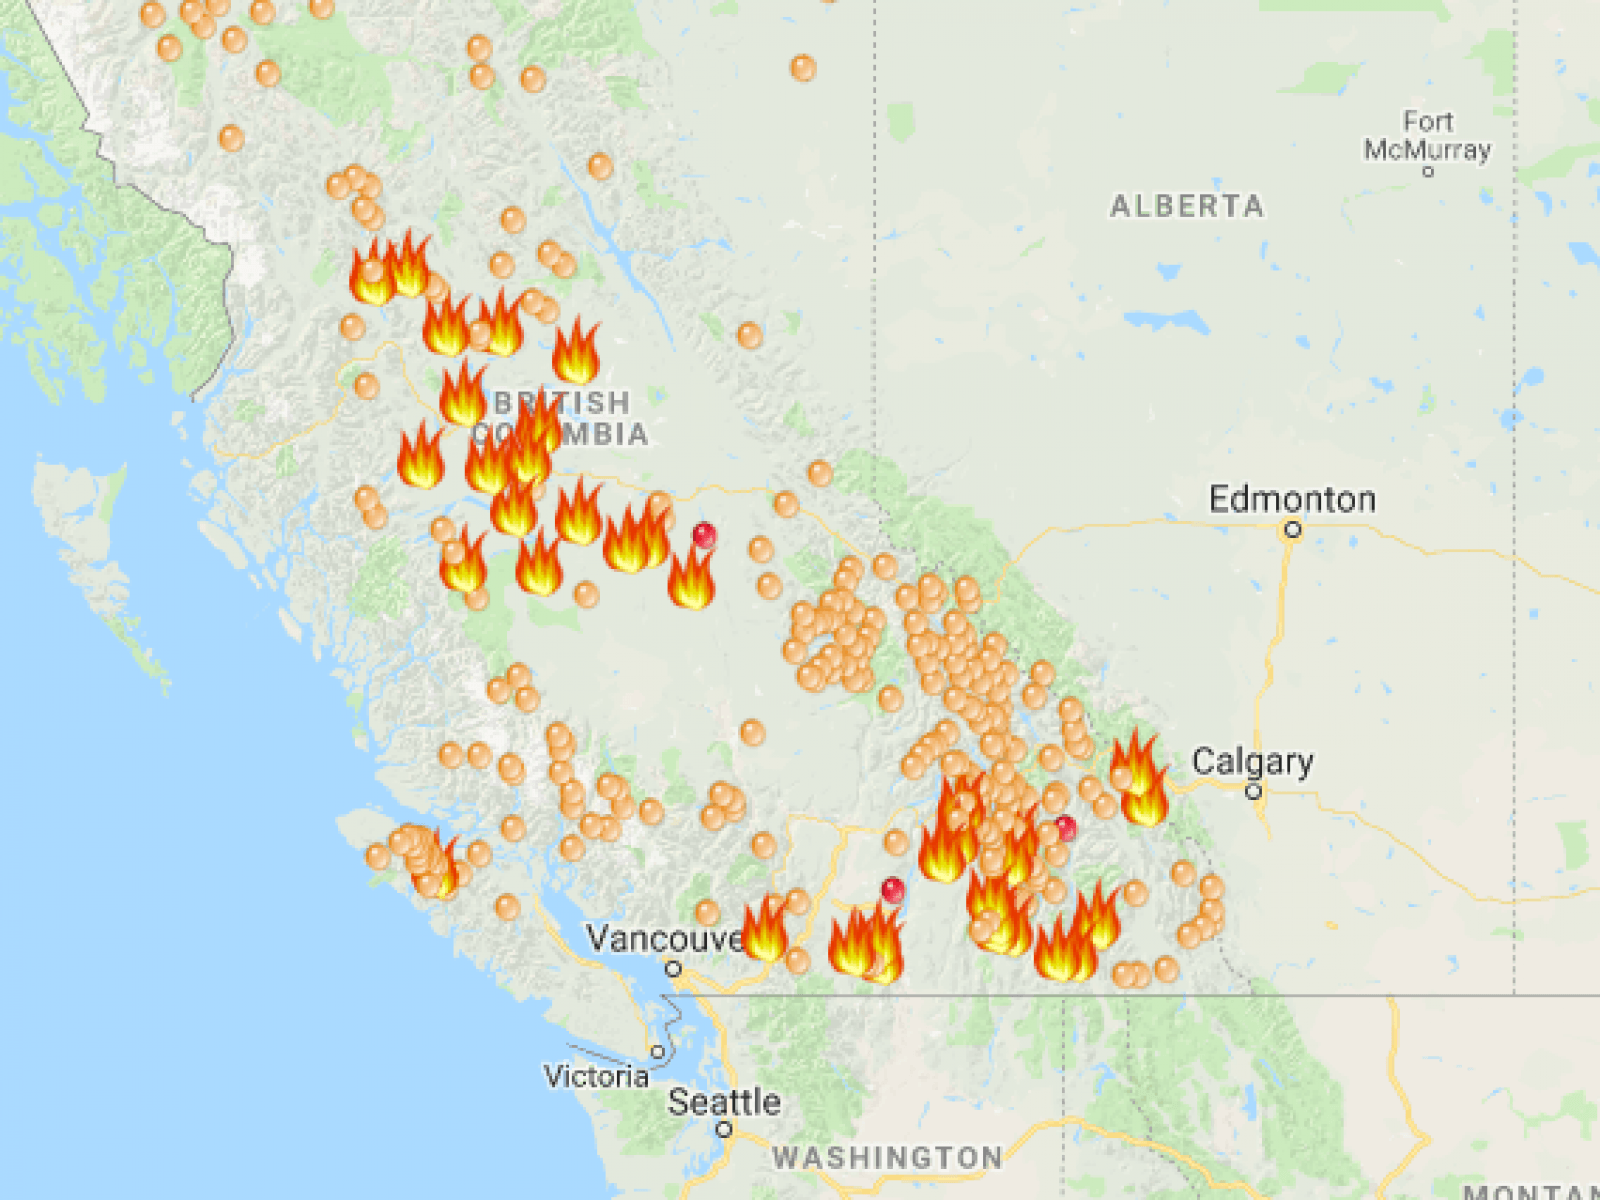 552016 Bc Fire Map Shows Where Almost 600 Canada Wildfires Are Still Burning 